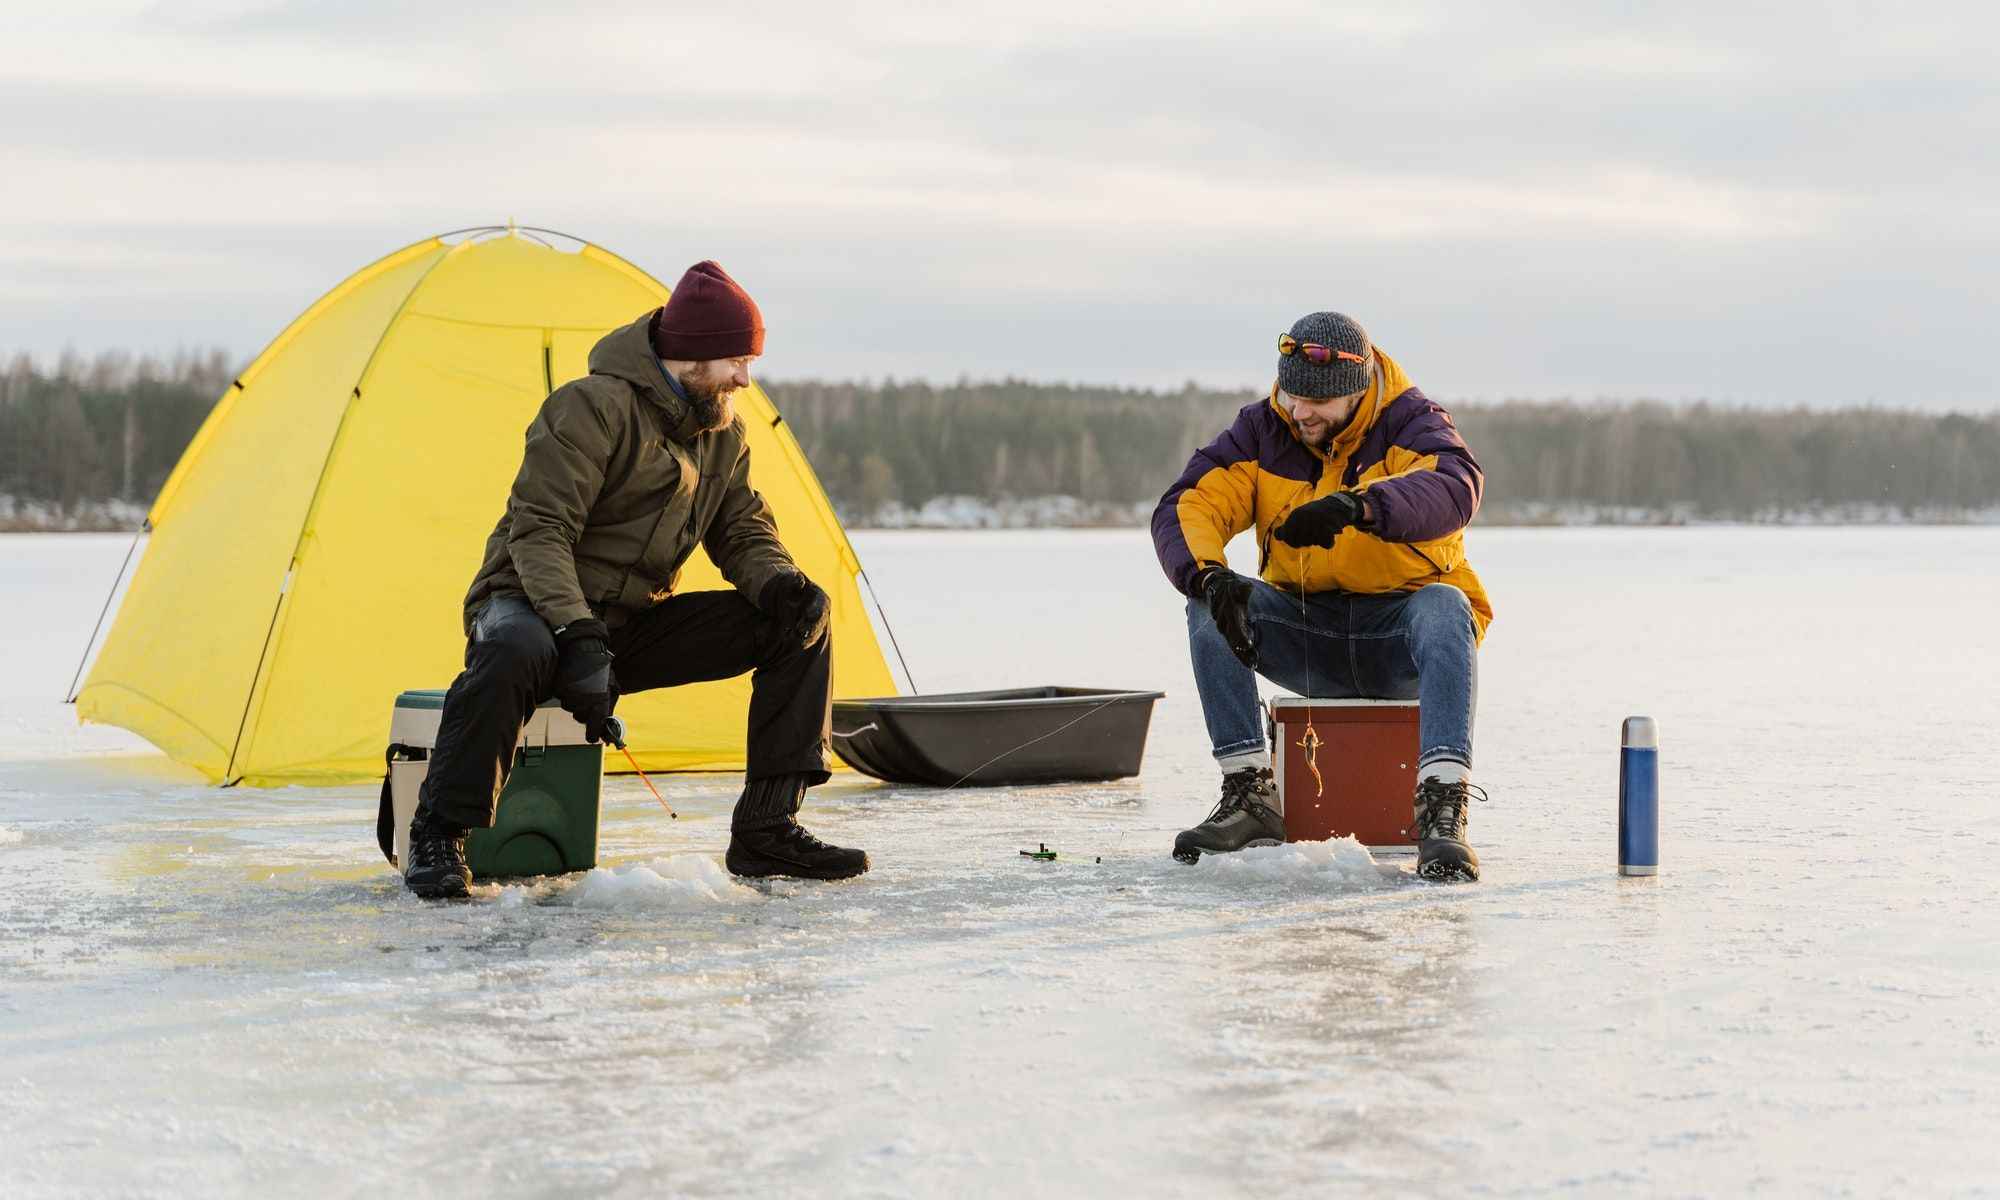 Winter Fishing Clothing: What You Should Have